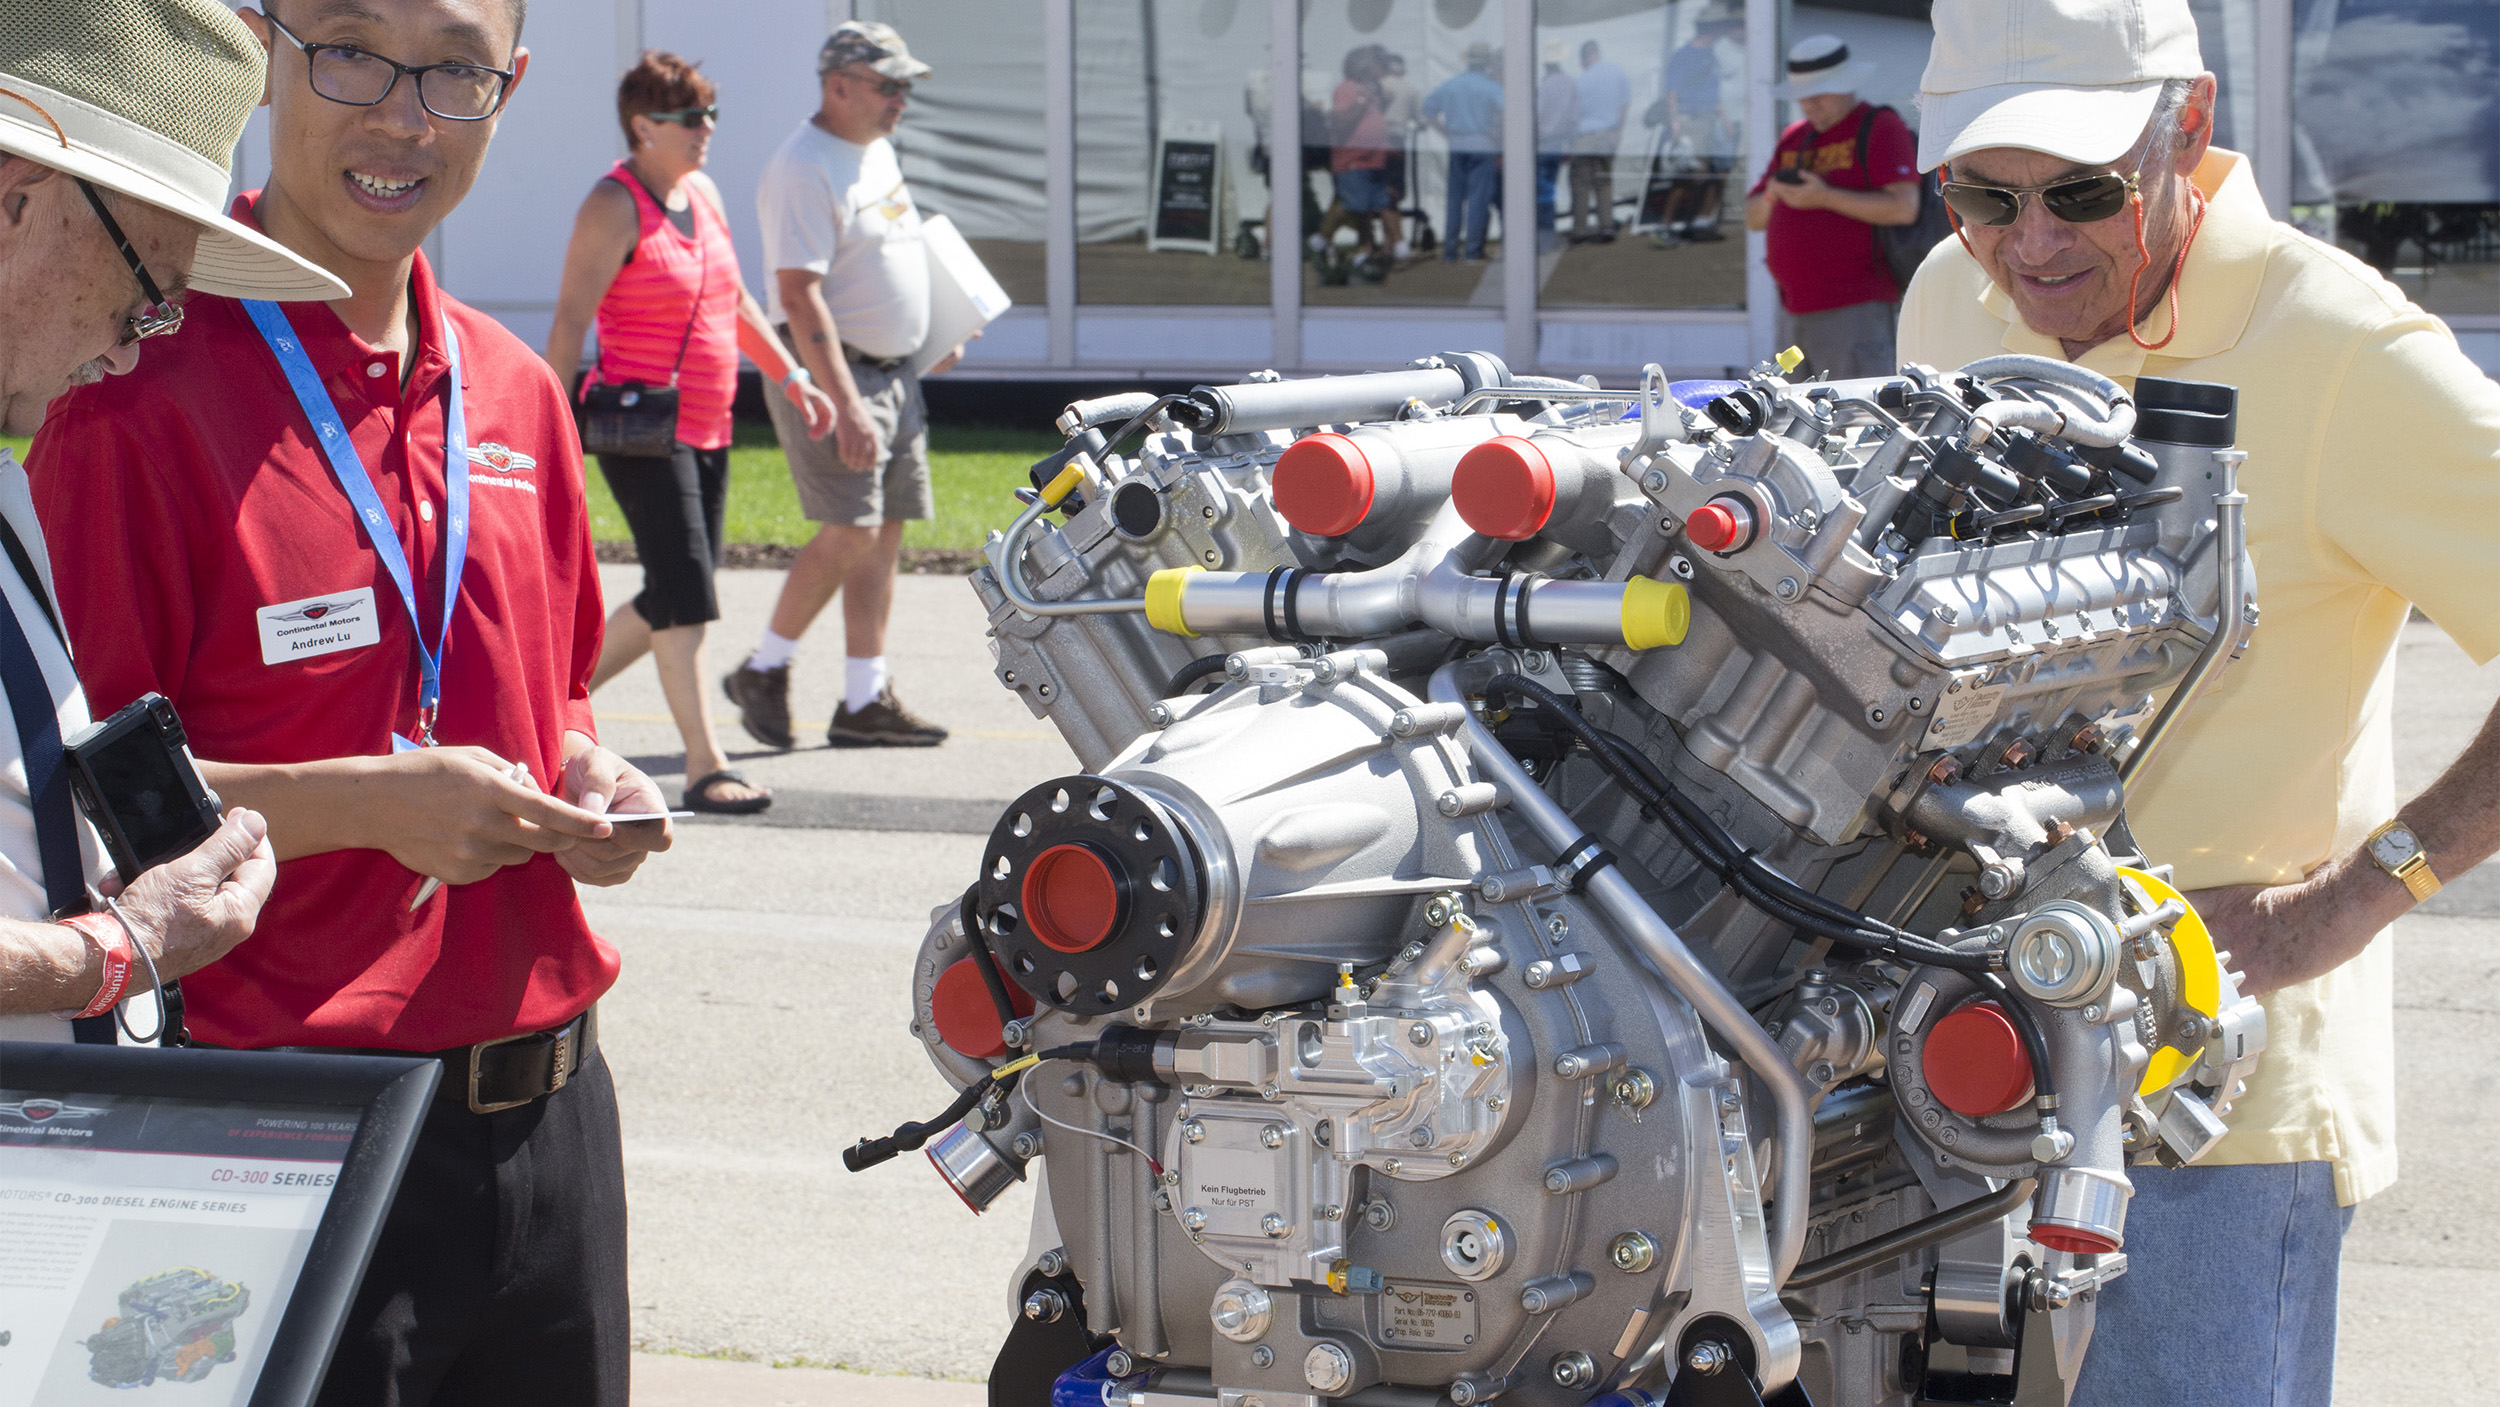 EAA AirVenture attendees talk to a Continental employee and look over the company’s CD-300 diesel engine that recently received European Aviation Safety Agency approval. Photo by Jim Moore.